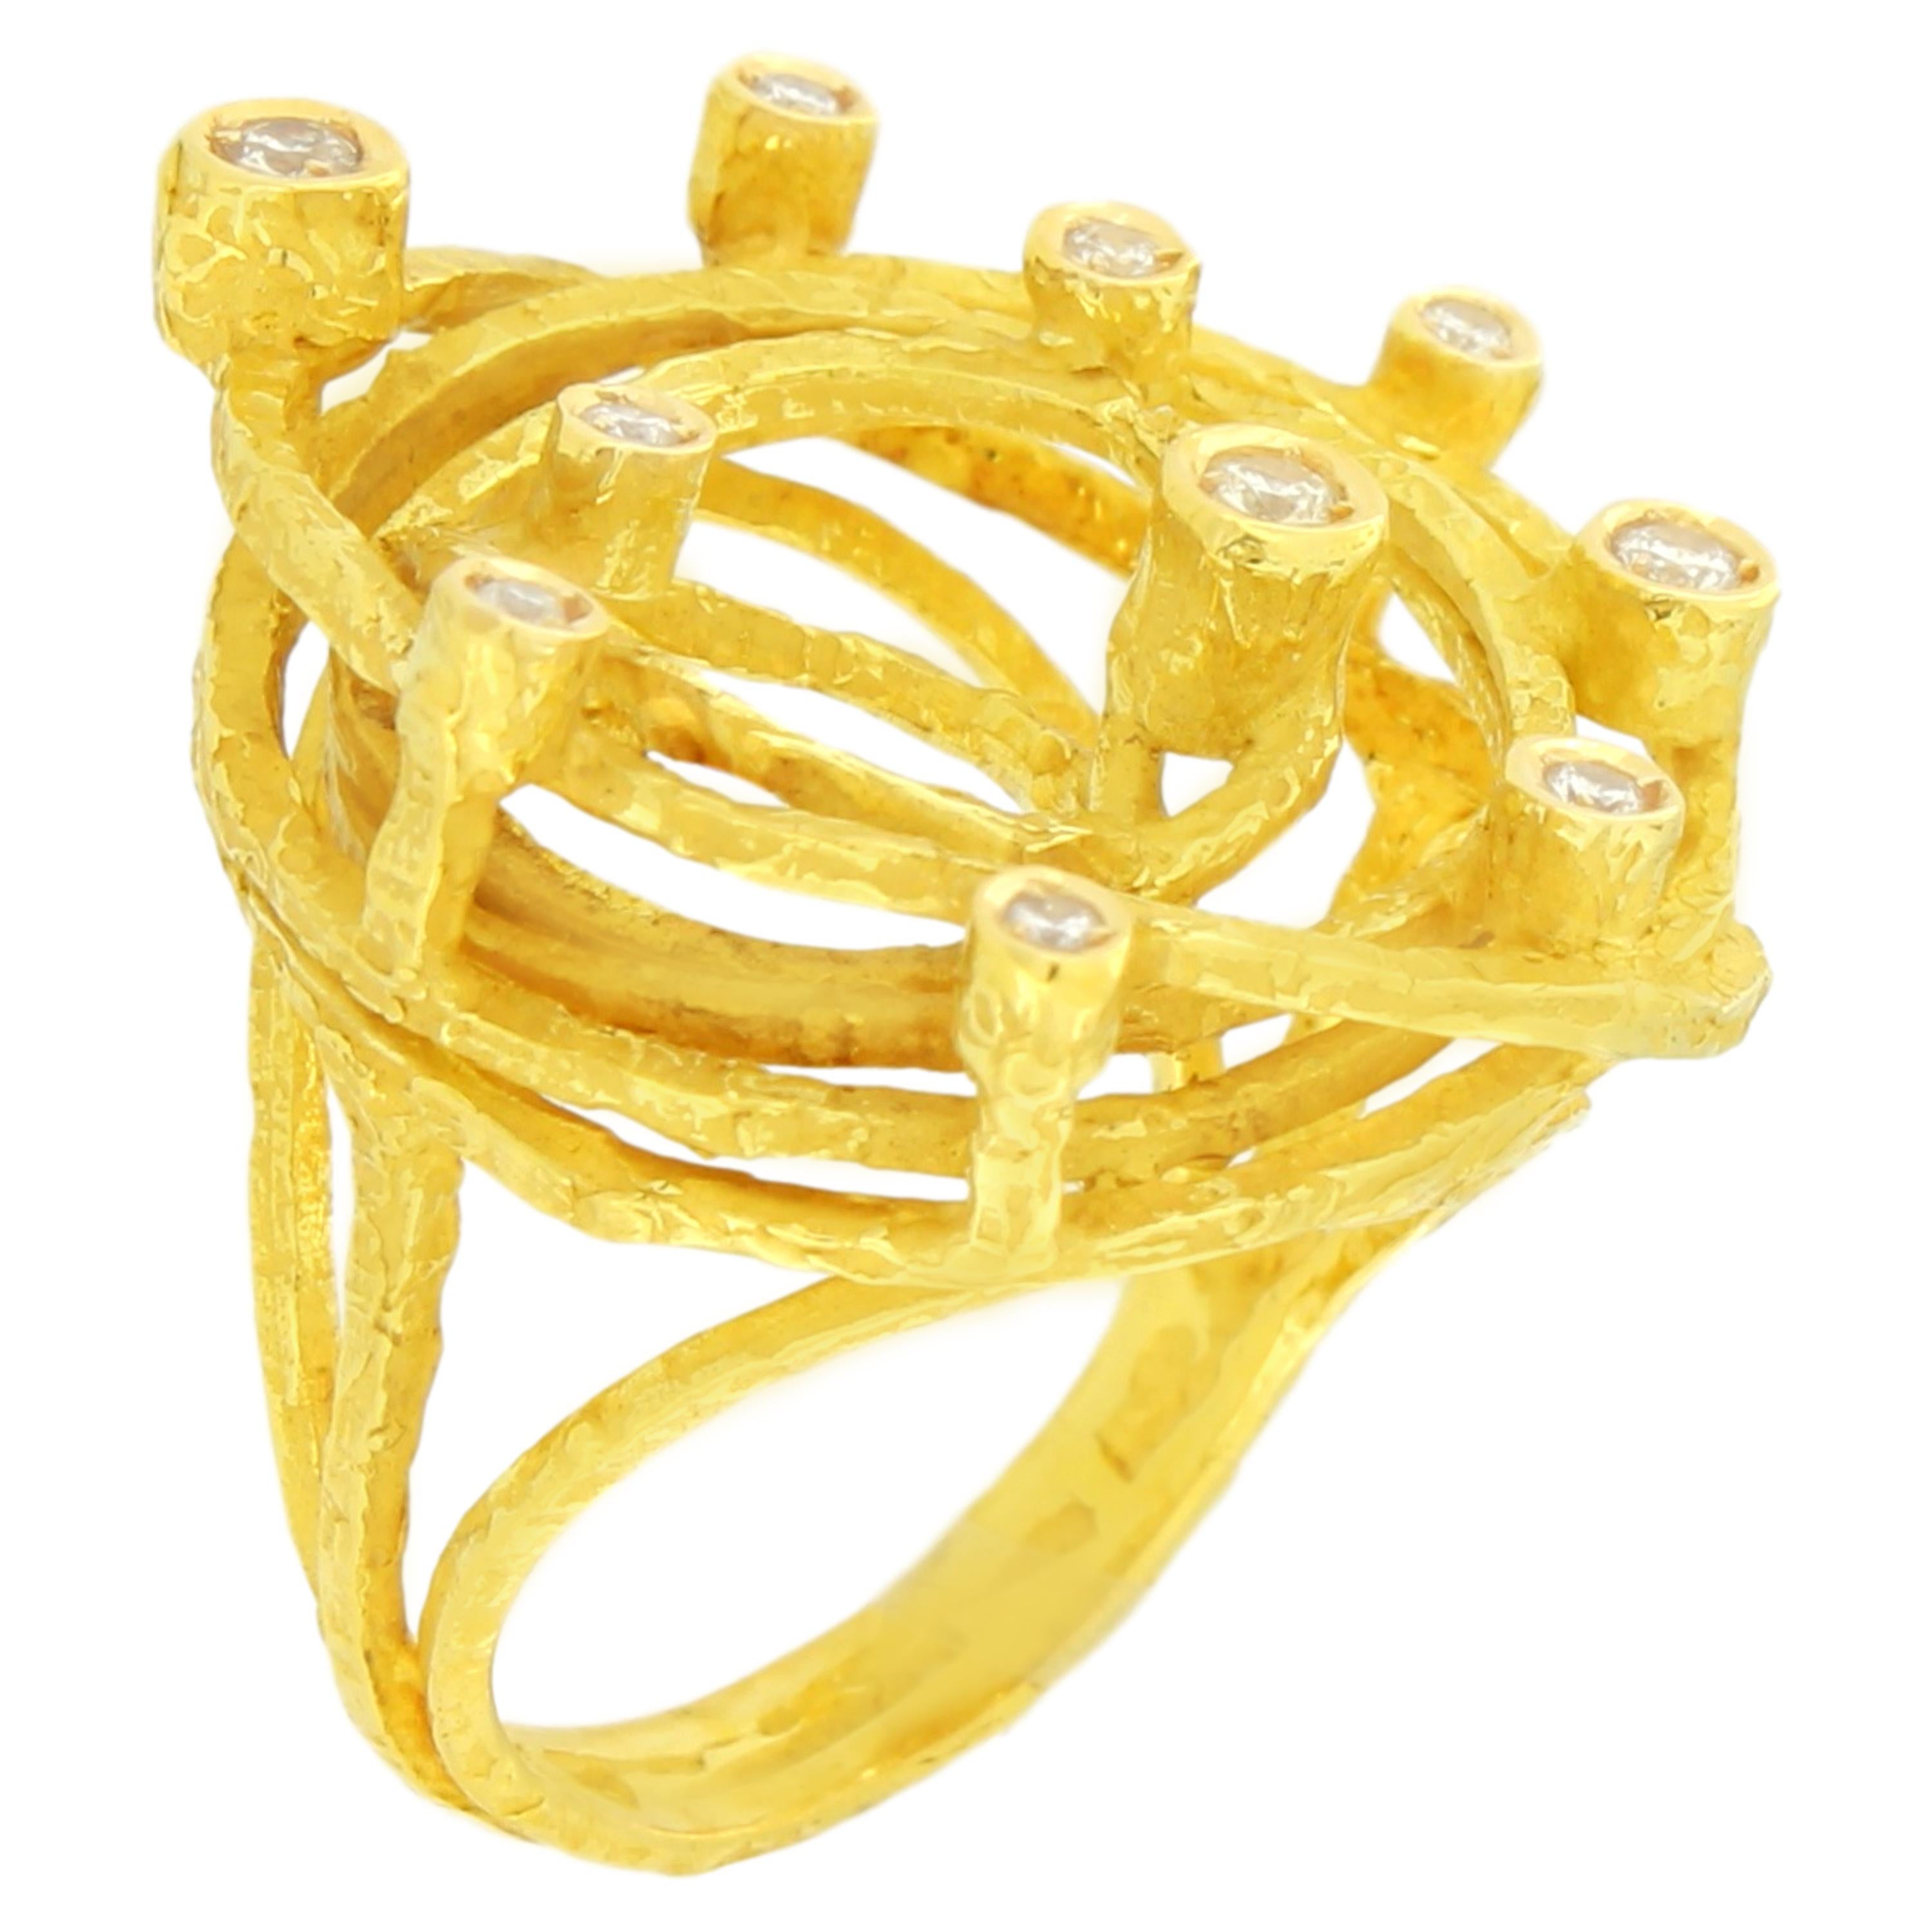 Lovely Diamonds Satin Yellow Gold Cocktail Ring, from Sacchi’s 